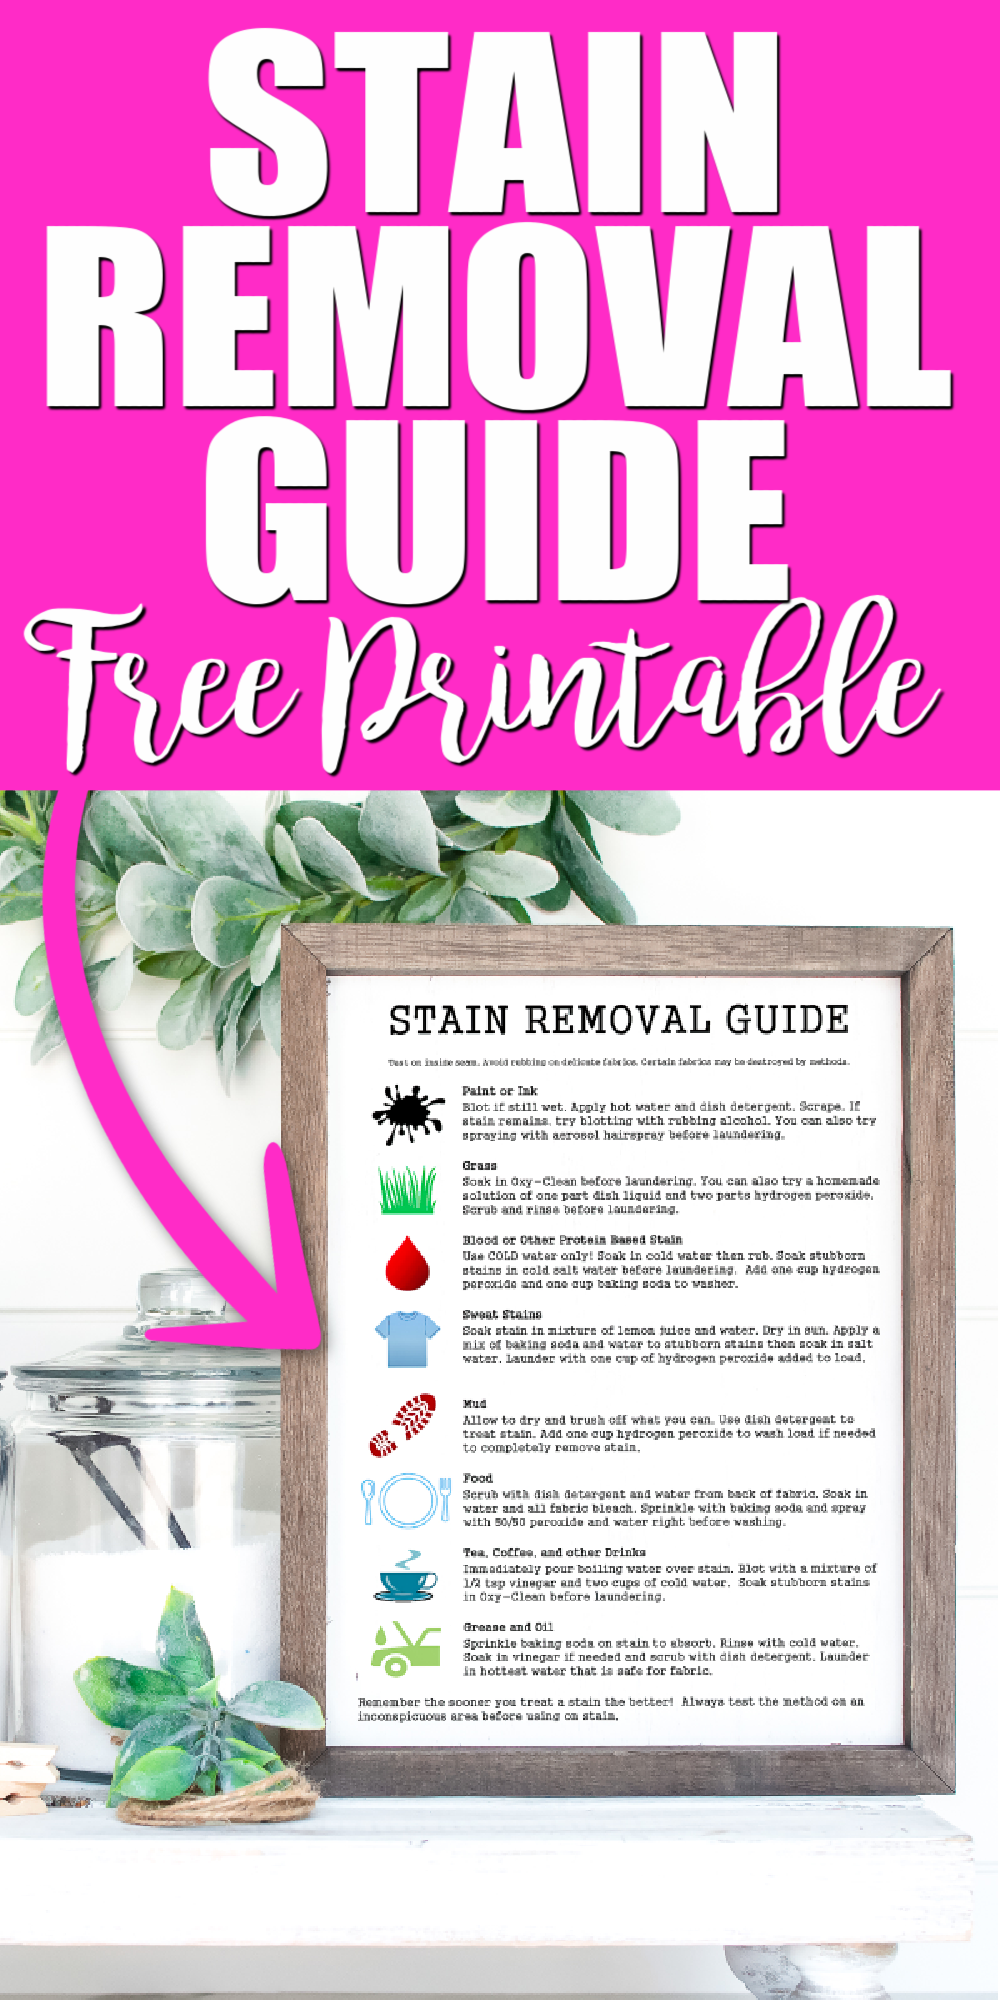 Stain Removal Guide Free Printable for Your Home Angie Holden The